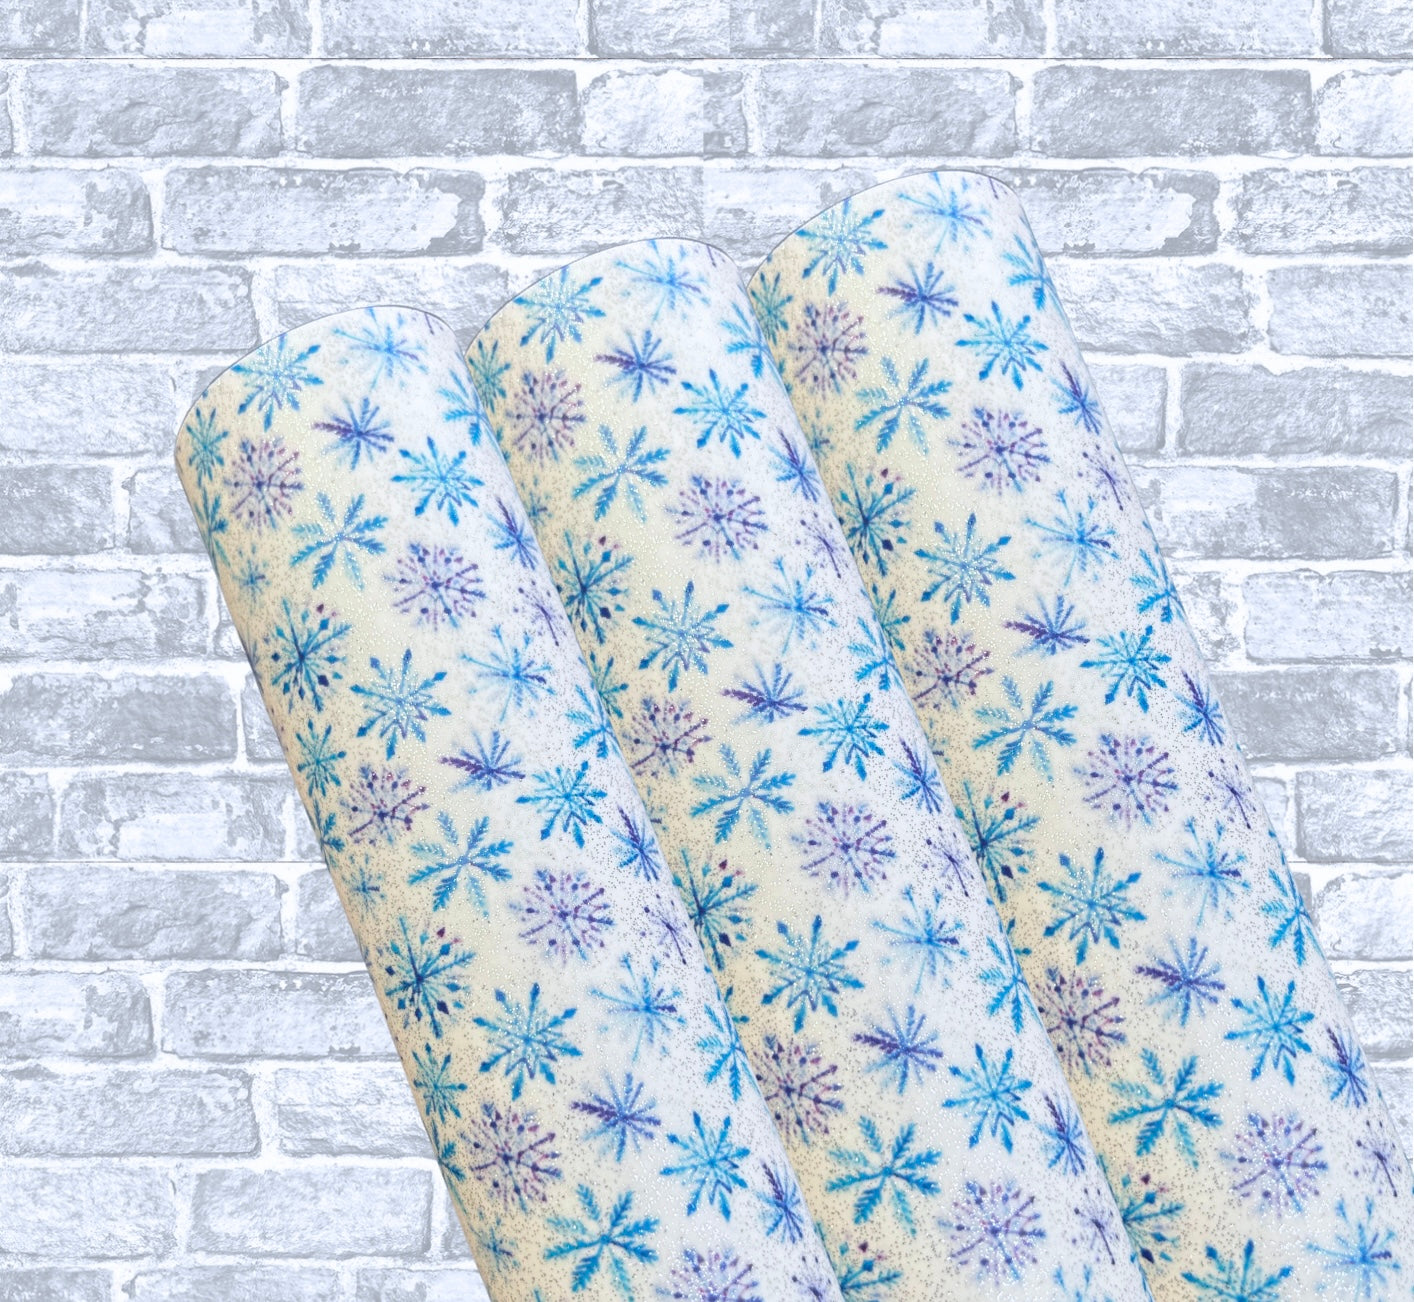 Frozen snowflake patterned smooth leatherette fabric